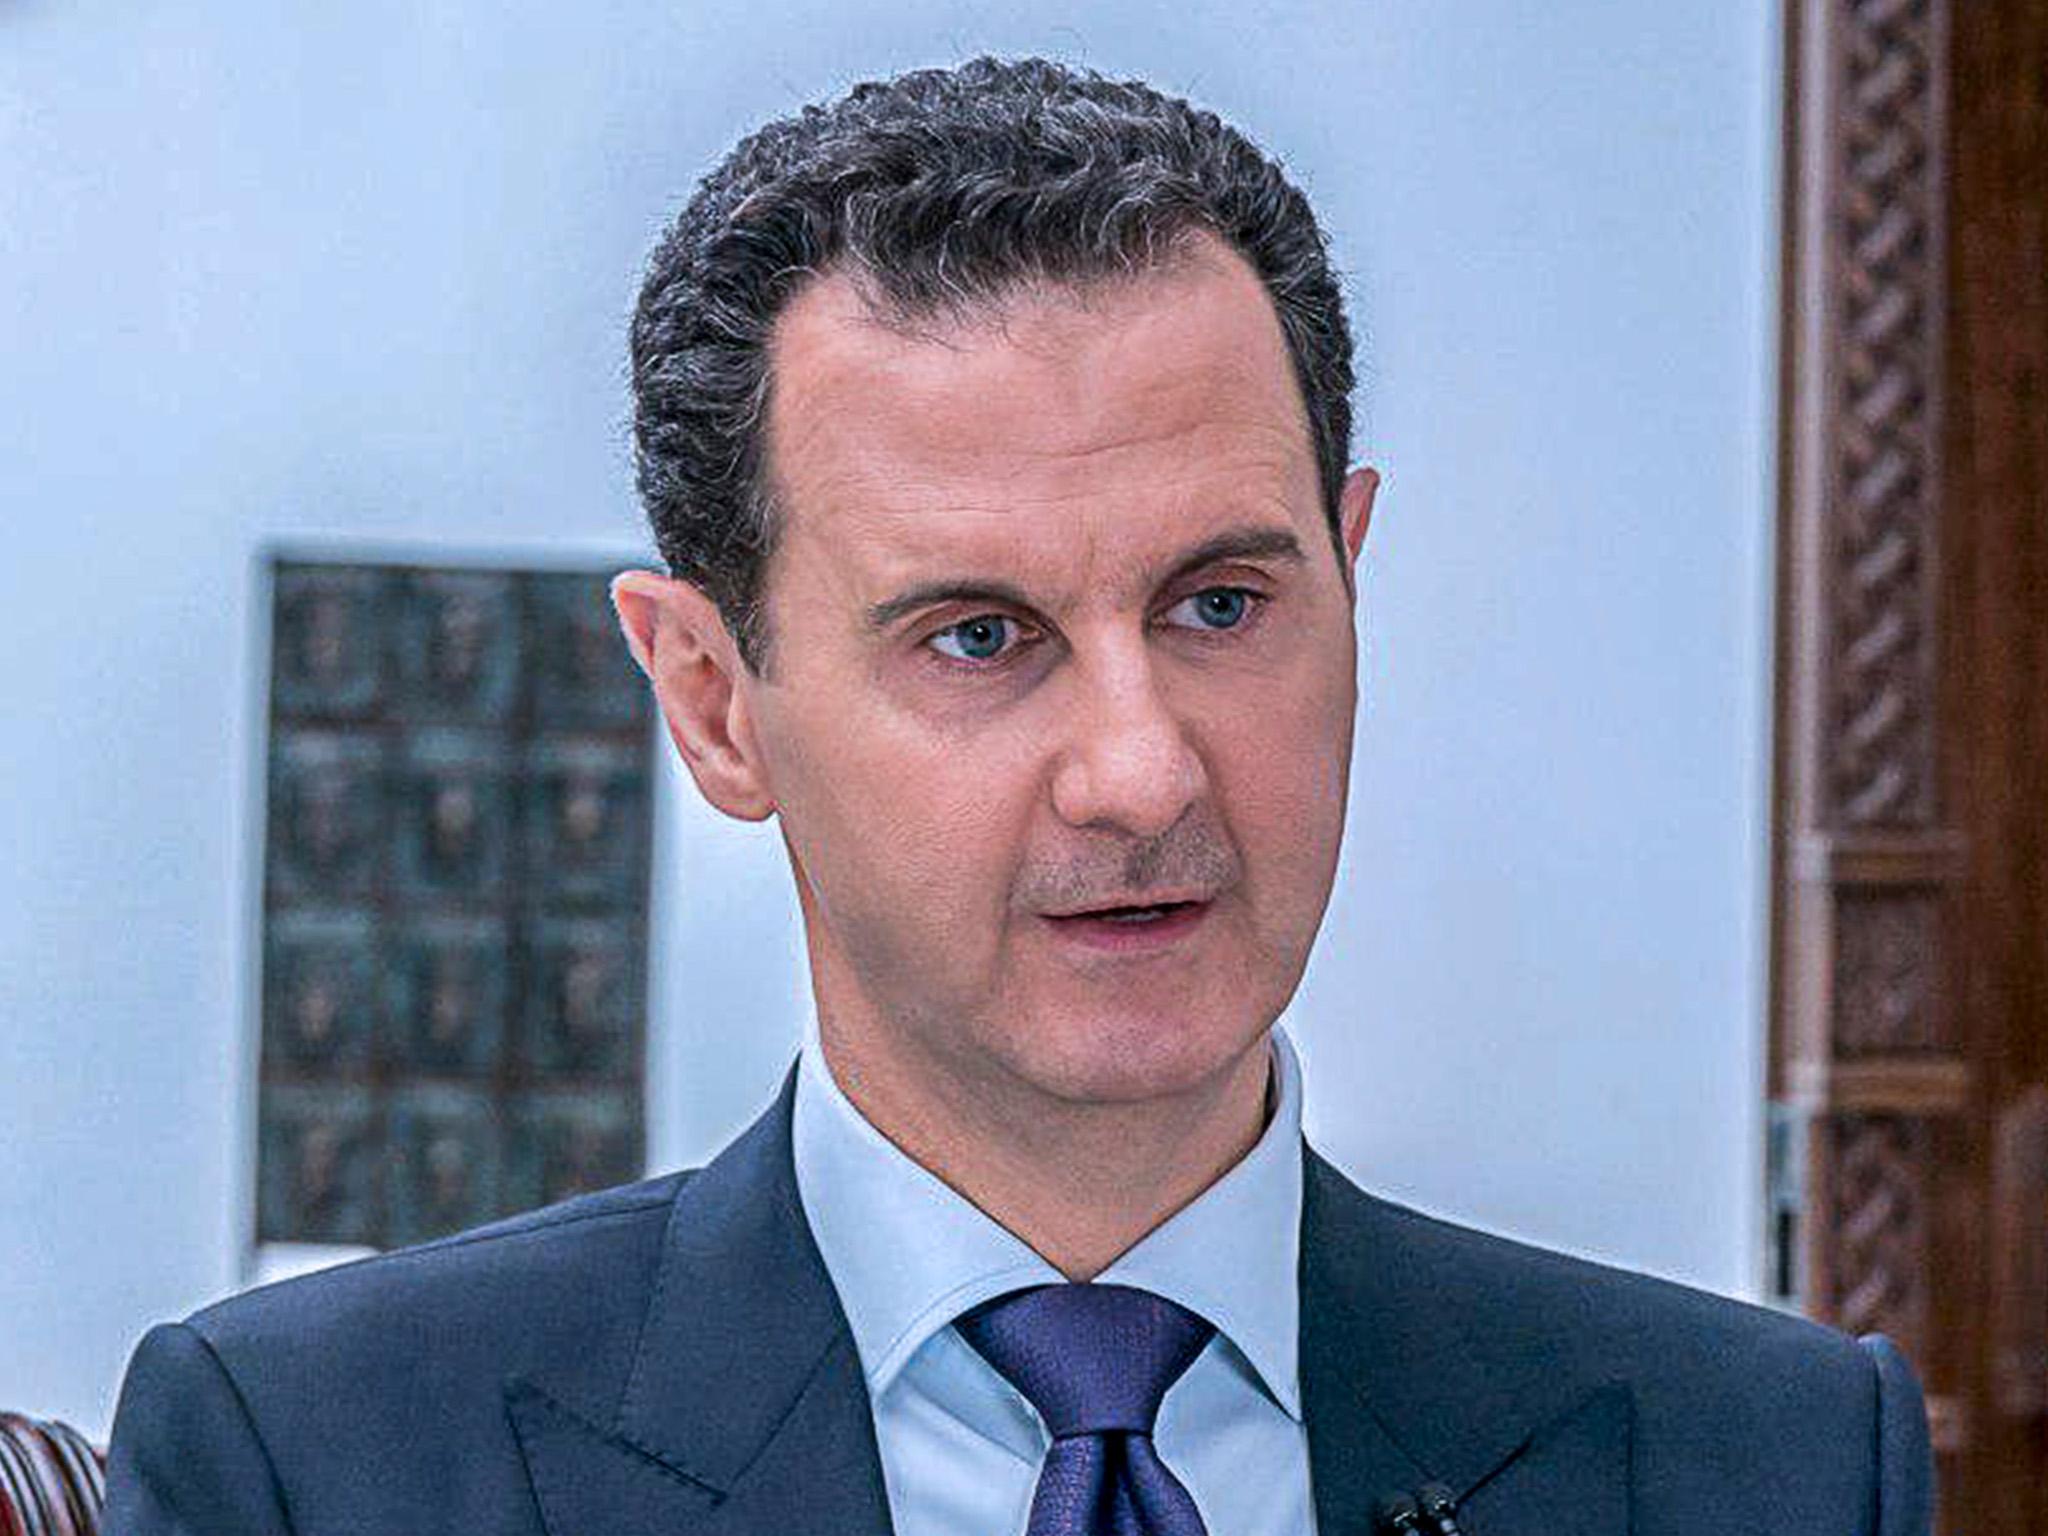 ‘The Syrian government will as ever fully support all policies and measures of the DPRK leadership,’ said Mr Assad